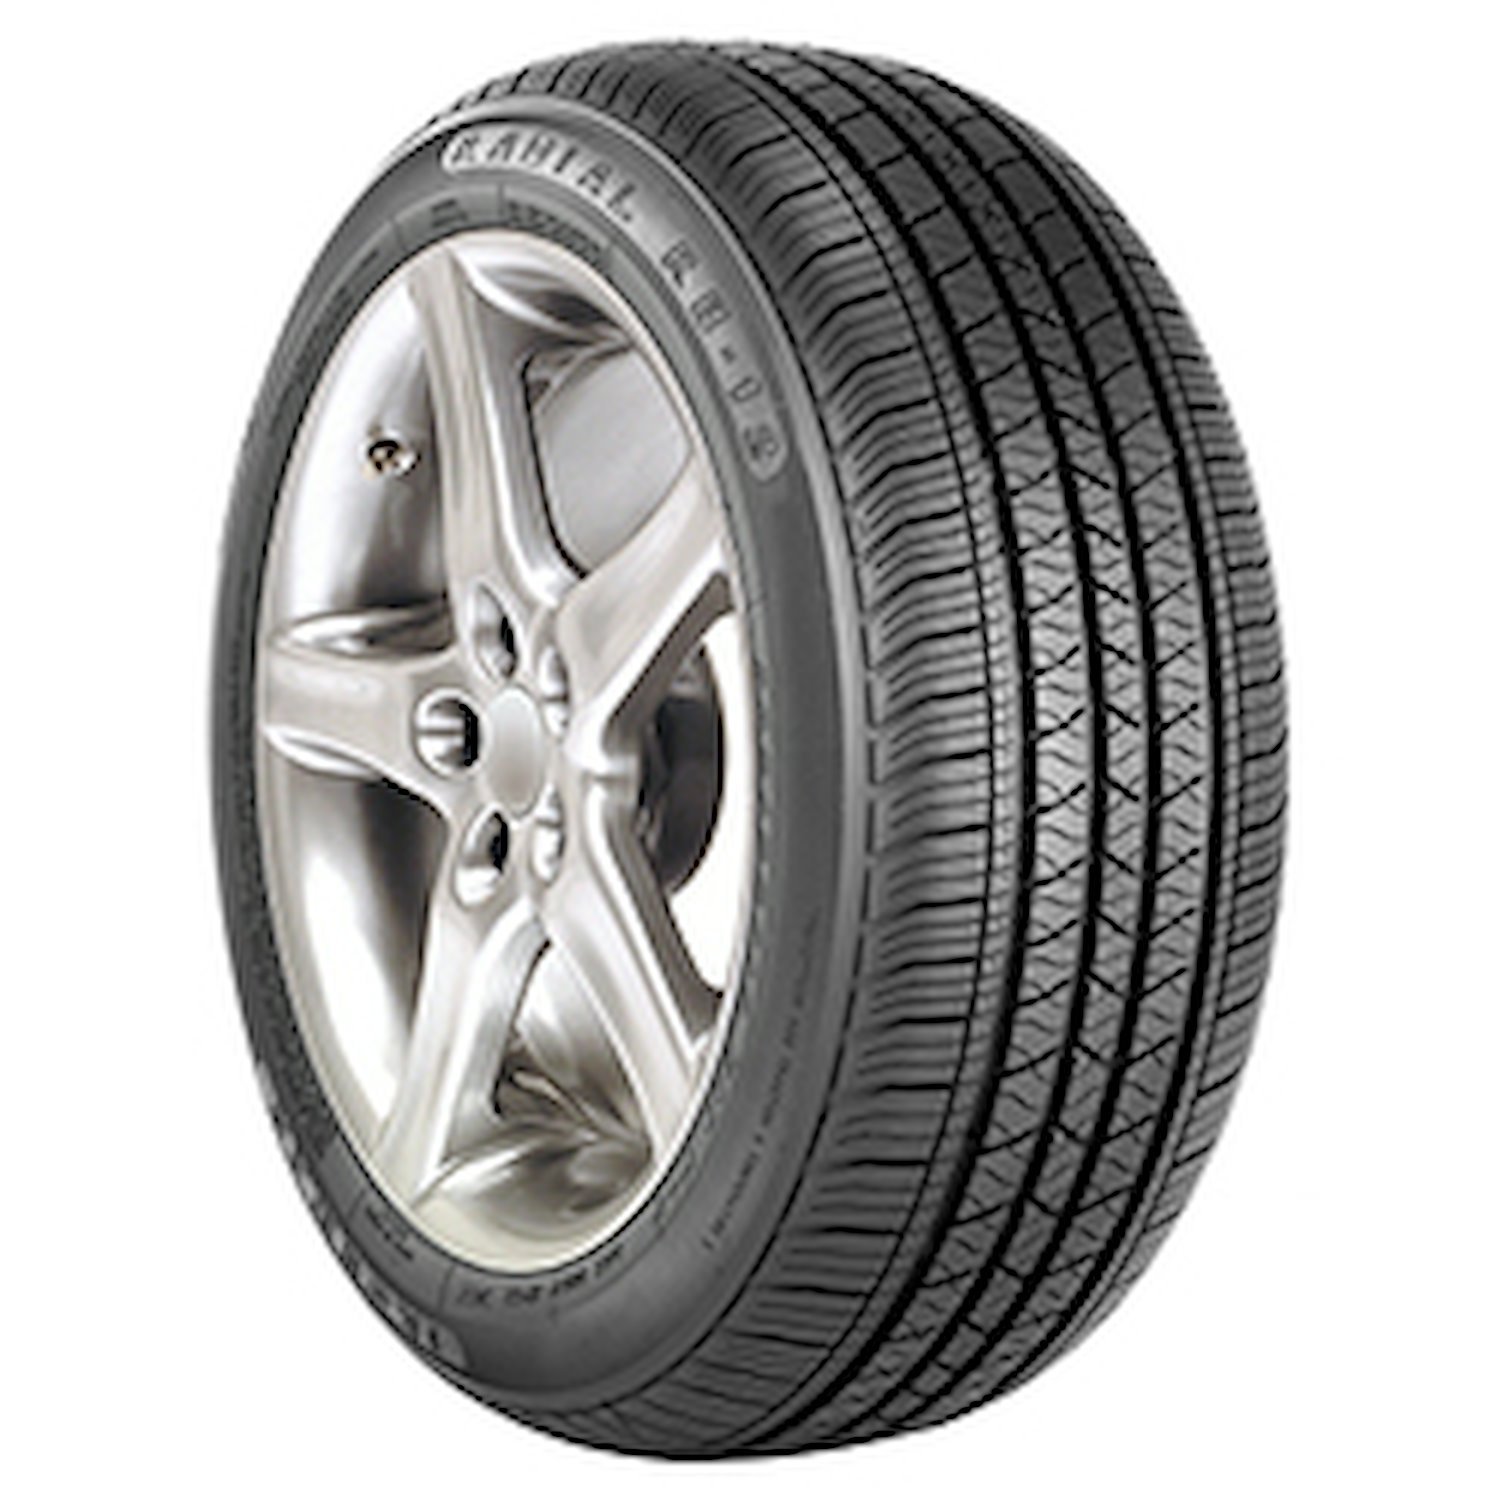 RB-12 Tire, 185/65R15 88T